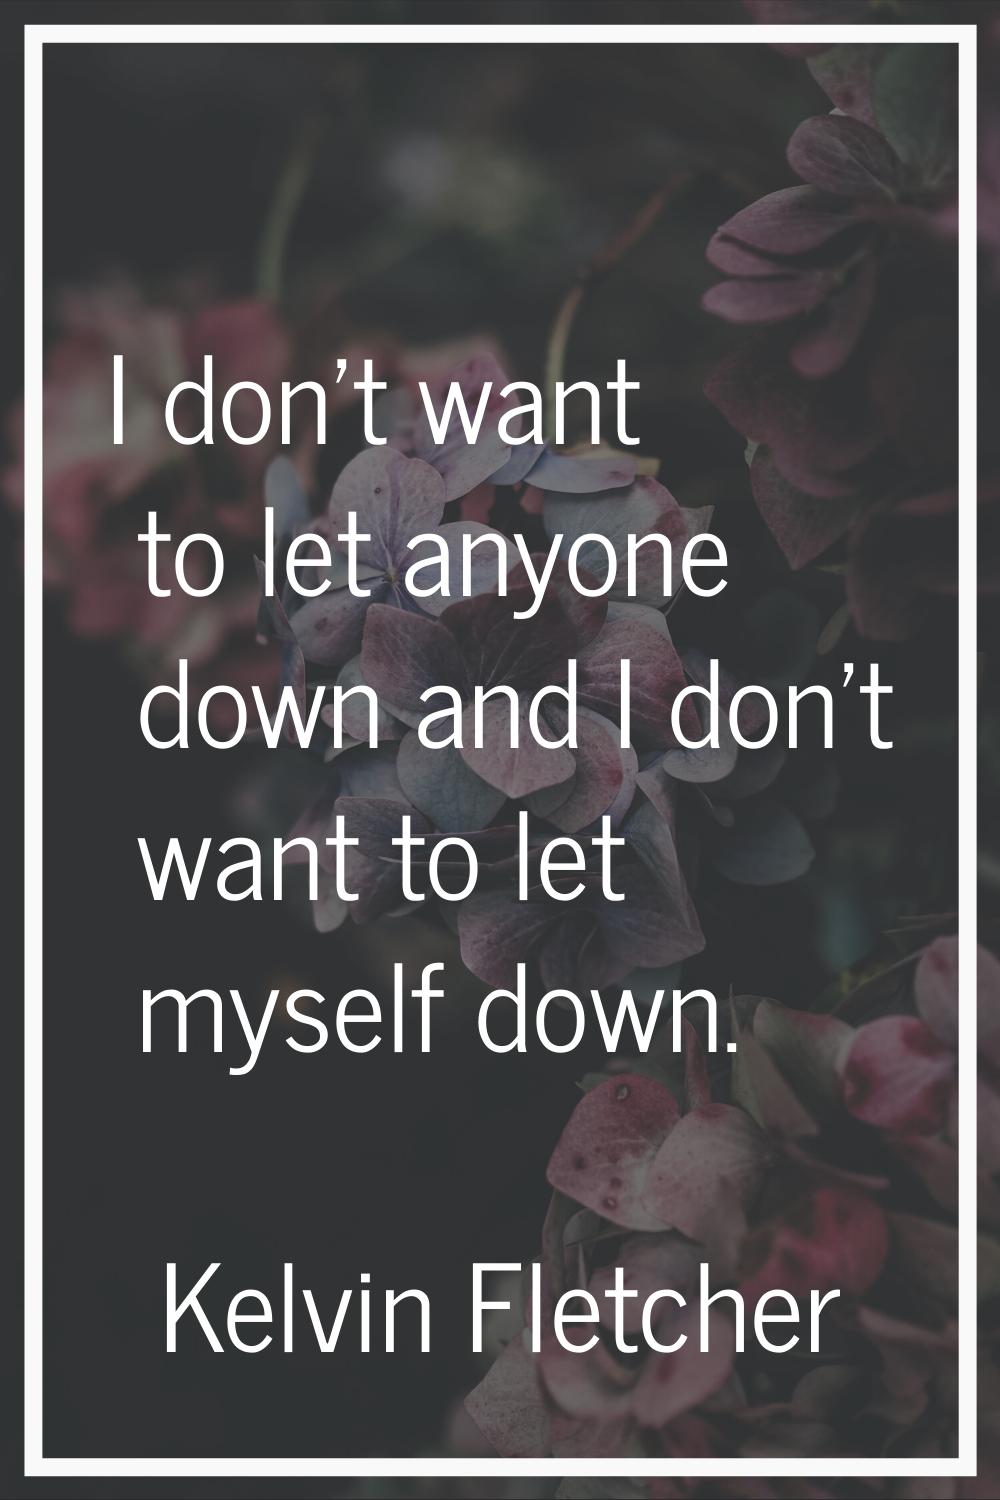 I don't want to let anyone down and I don't want to let myself down.